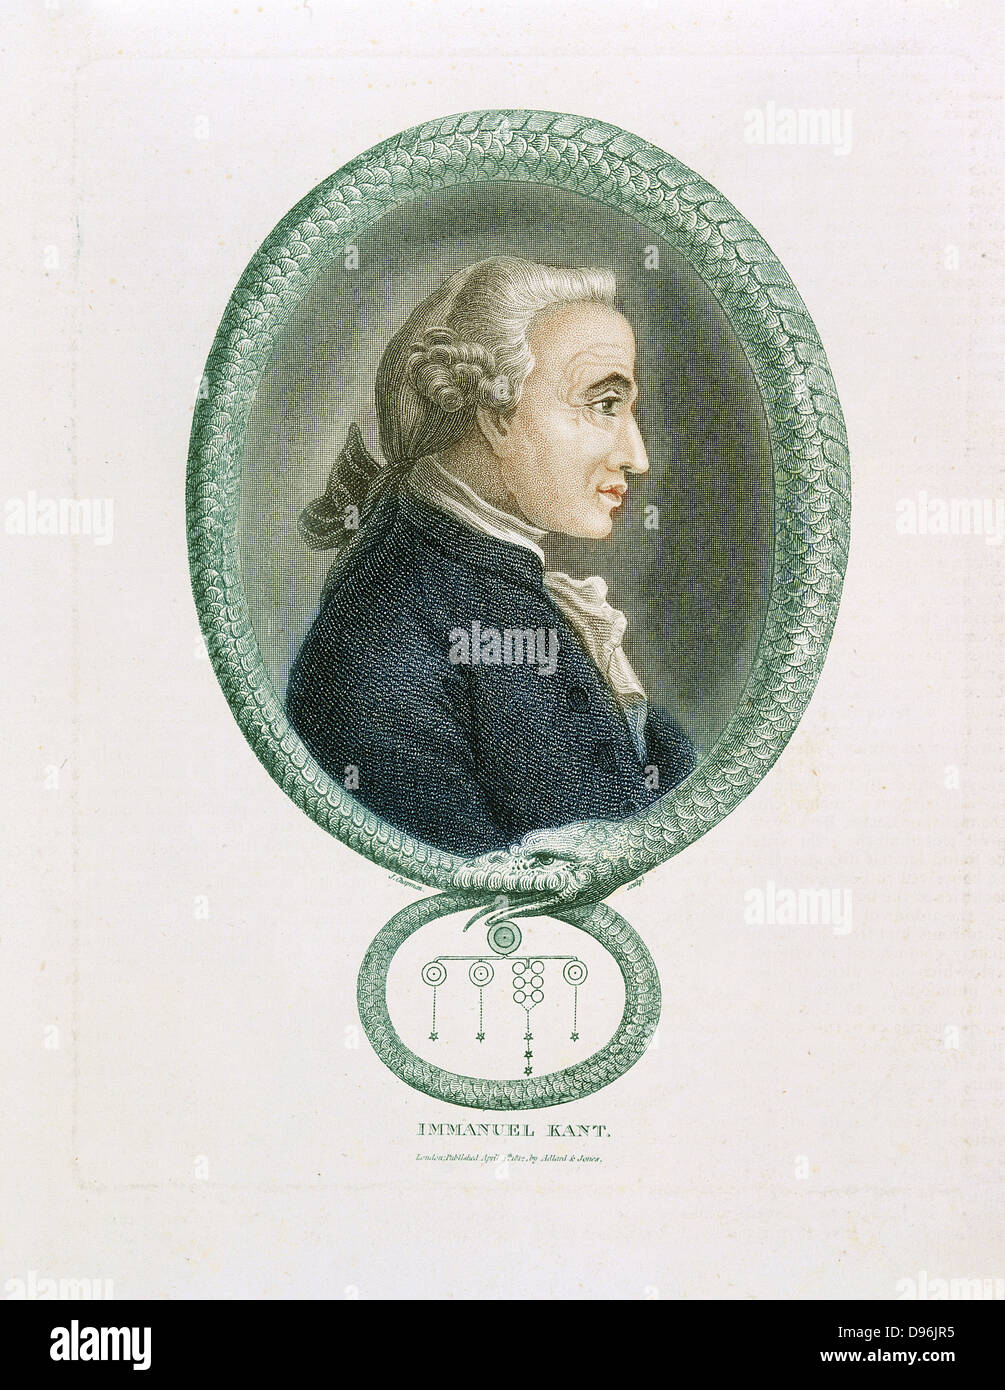 Immanuel Kant (1724-1804)  German philosopher. Print published London 1812. Profile portrait surrounded by Ouroboros, ancient Egyptian-Greek symbolic serpent with tail in mouth devouring itself, representing unity of material and spiritual in eternal circle of change and recreation. Stock Photo